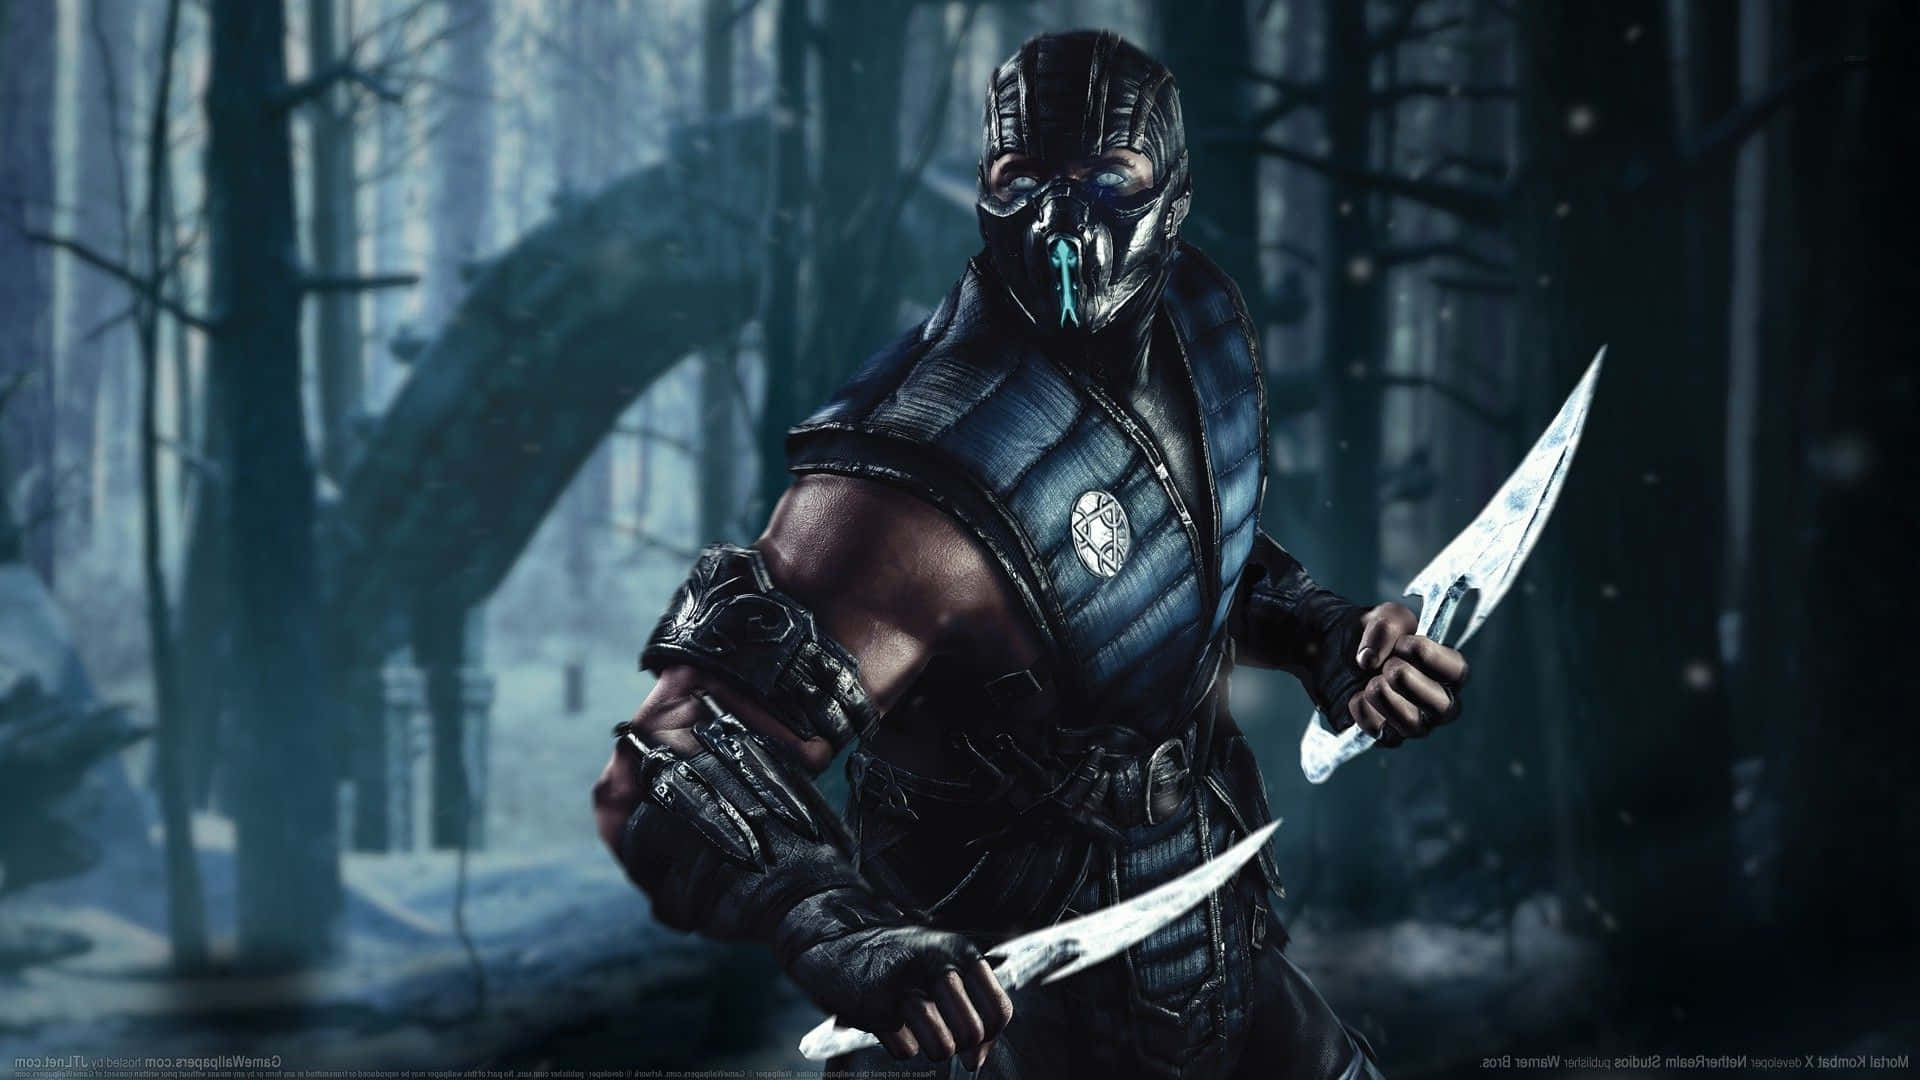 Harness your strength and fury in Mortal Kombat